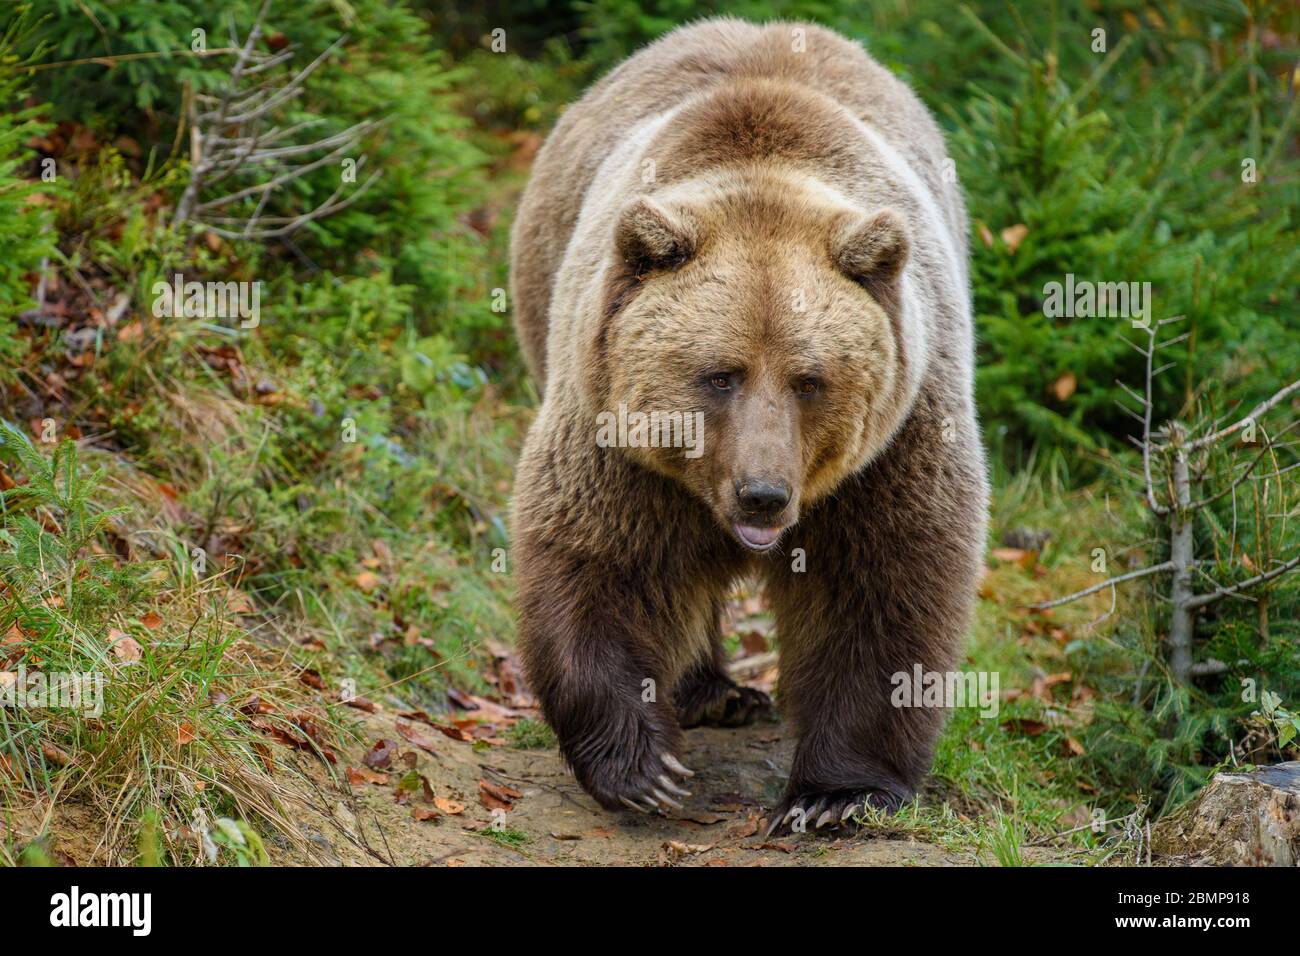 Close up Big brown bear in the forest. Dangerous animal in natural habitat. Wildlife scene Stock Photo